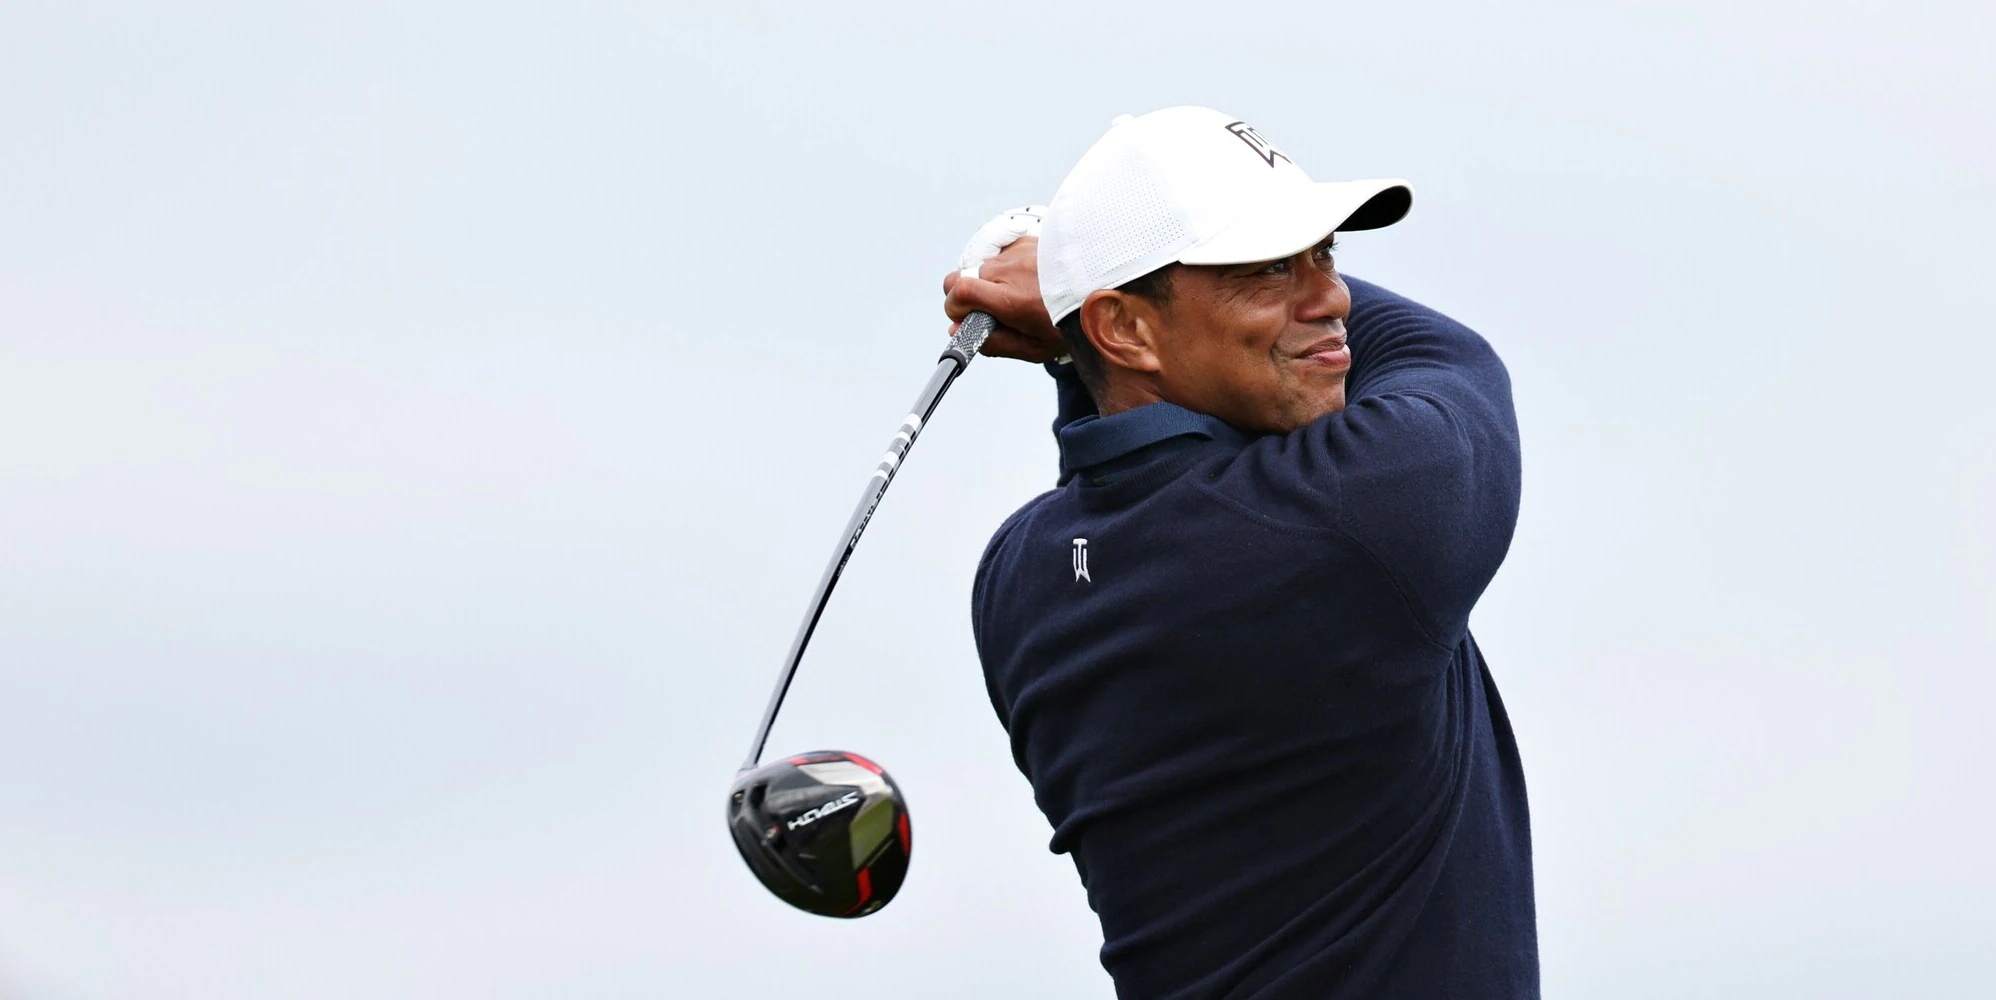 Load for Golf, Woods Open: "being here means a lot to me"